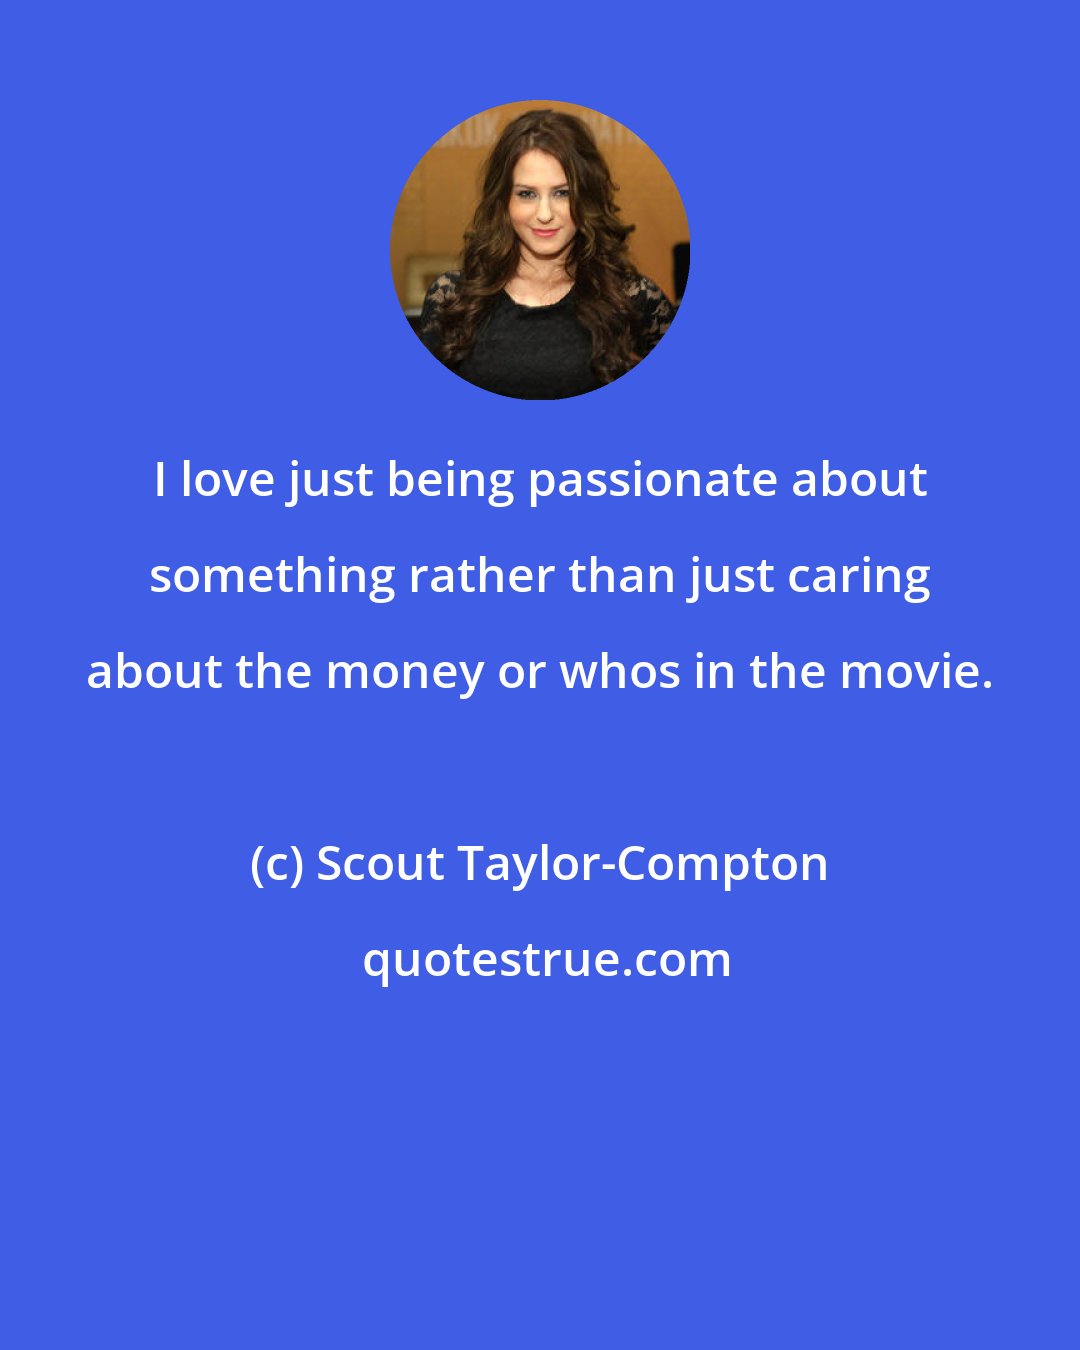 Scout Taylor-Compton: I love just being passionate about something rather than just caring about the money or whos in the movie.